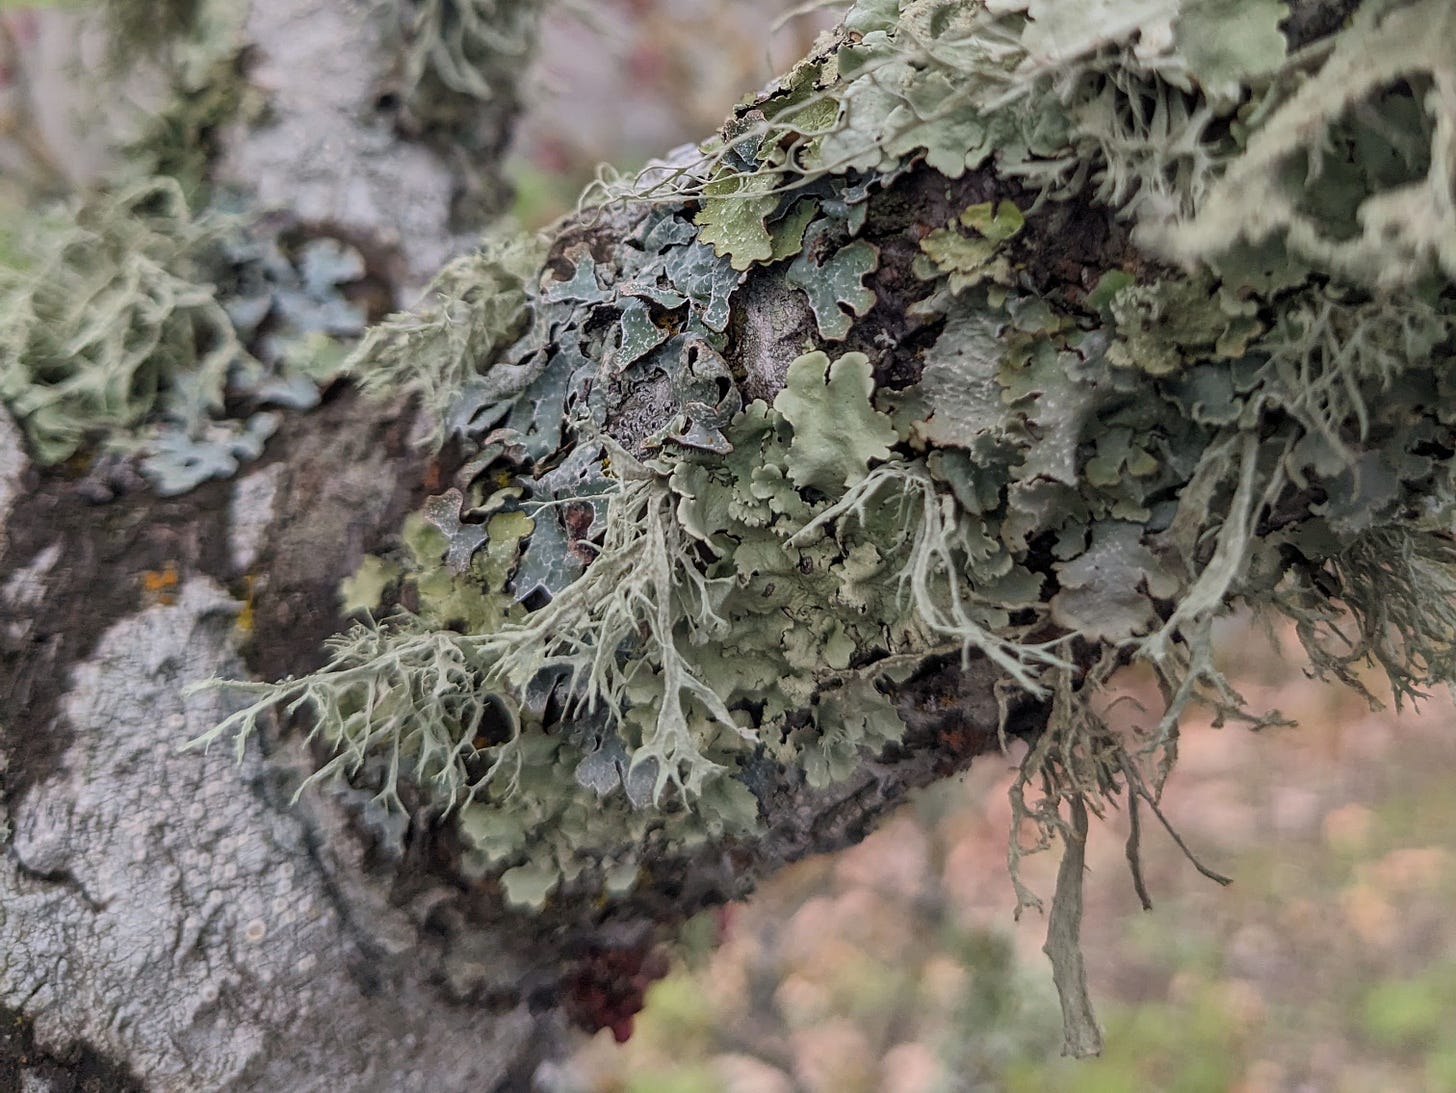 Close-up photograph of a tree branch covered in various pale green lichens and mosses.